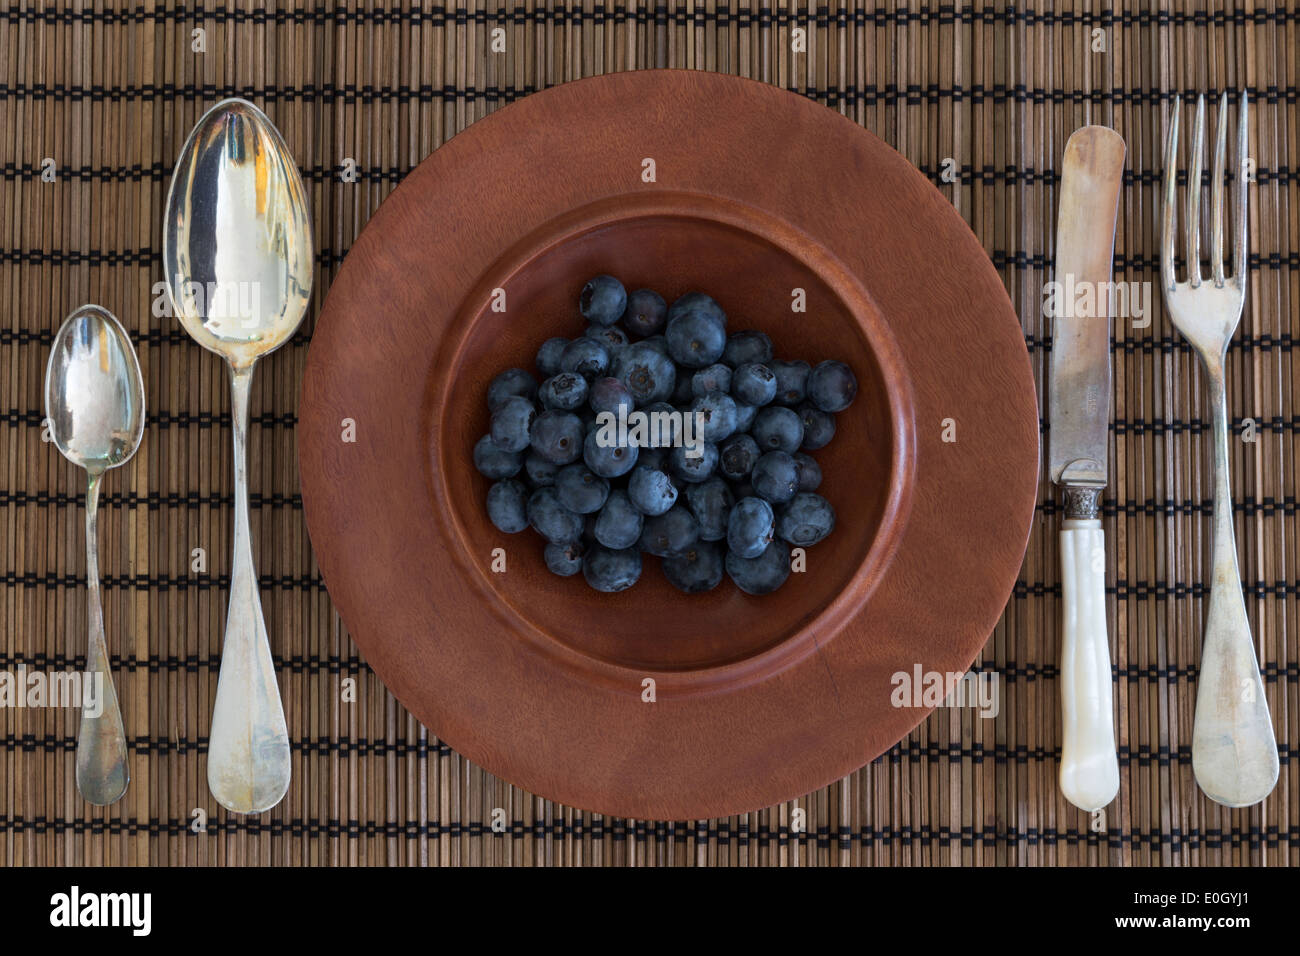 A photograph of some antique silver cutlery and a wooden jarrah bowl filled with blueberries. Stock Photo